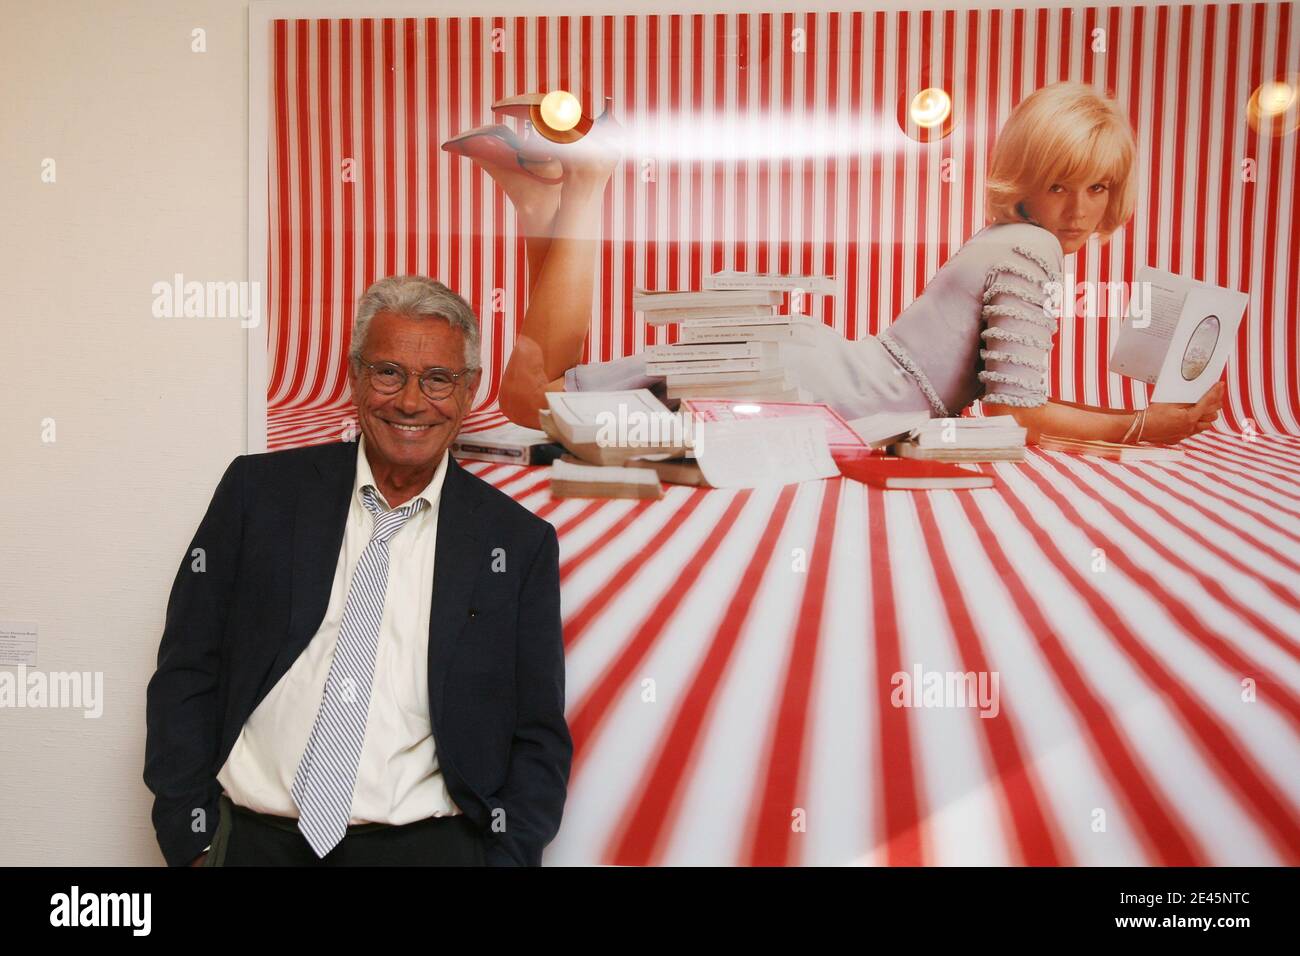 Jean-Marie Perier attends the opening of Photographer Jean-Marie Perier's  exhibition in Paris, France on June 4, 2009. Photo by Denis  Guignebourg/ABACAPRESS.COM Stock Photo - Alamy